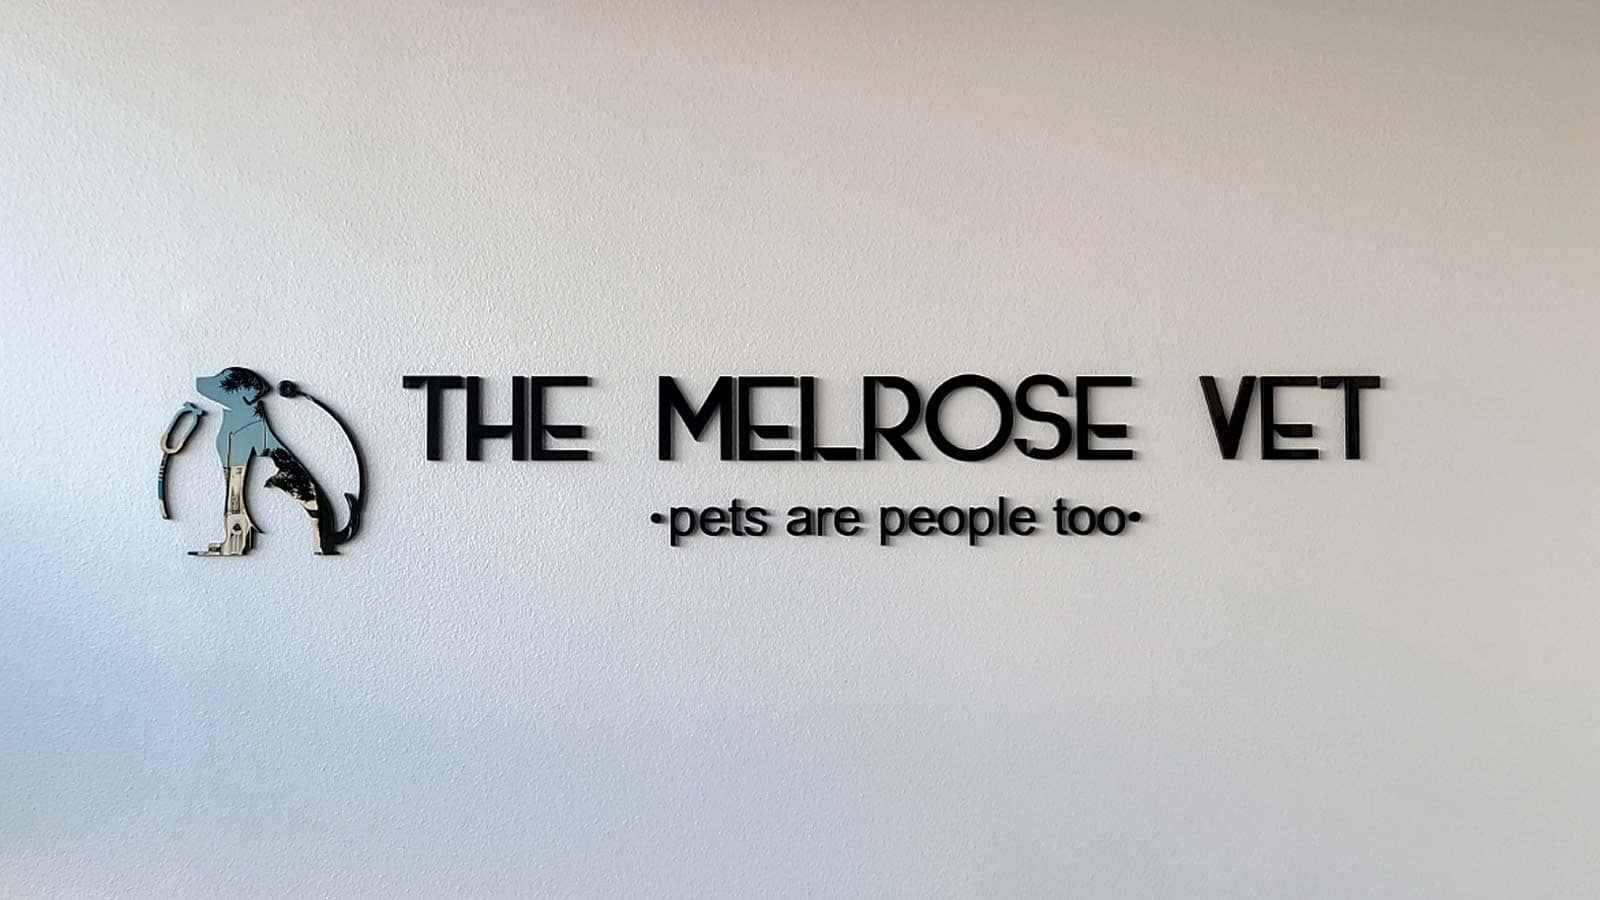 The Melrose Vet 3D sign attached to the wall